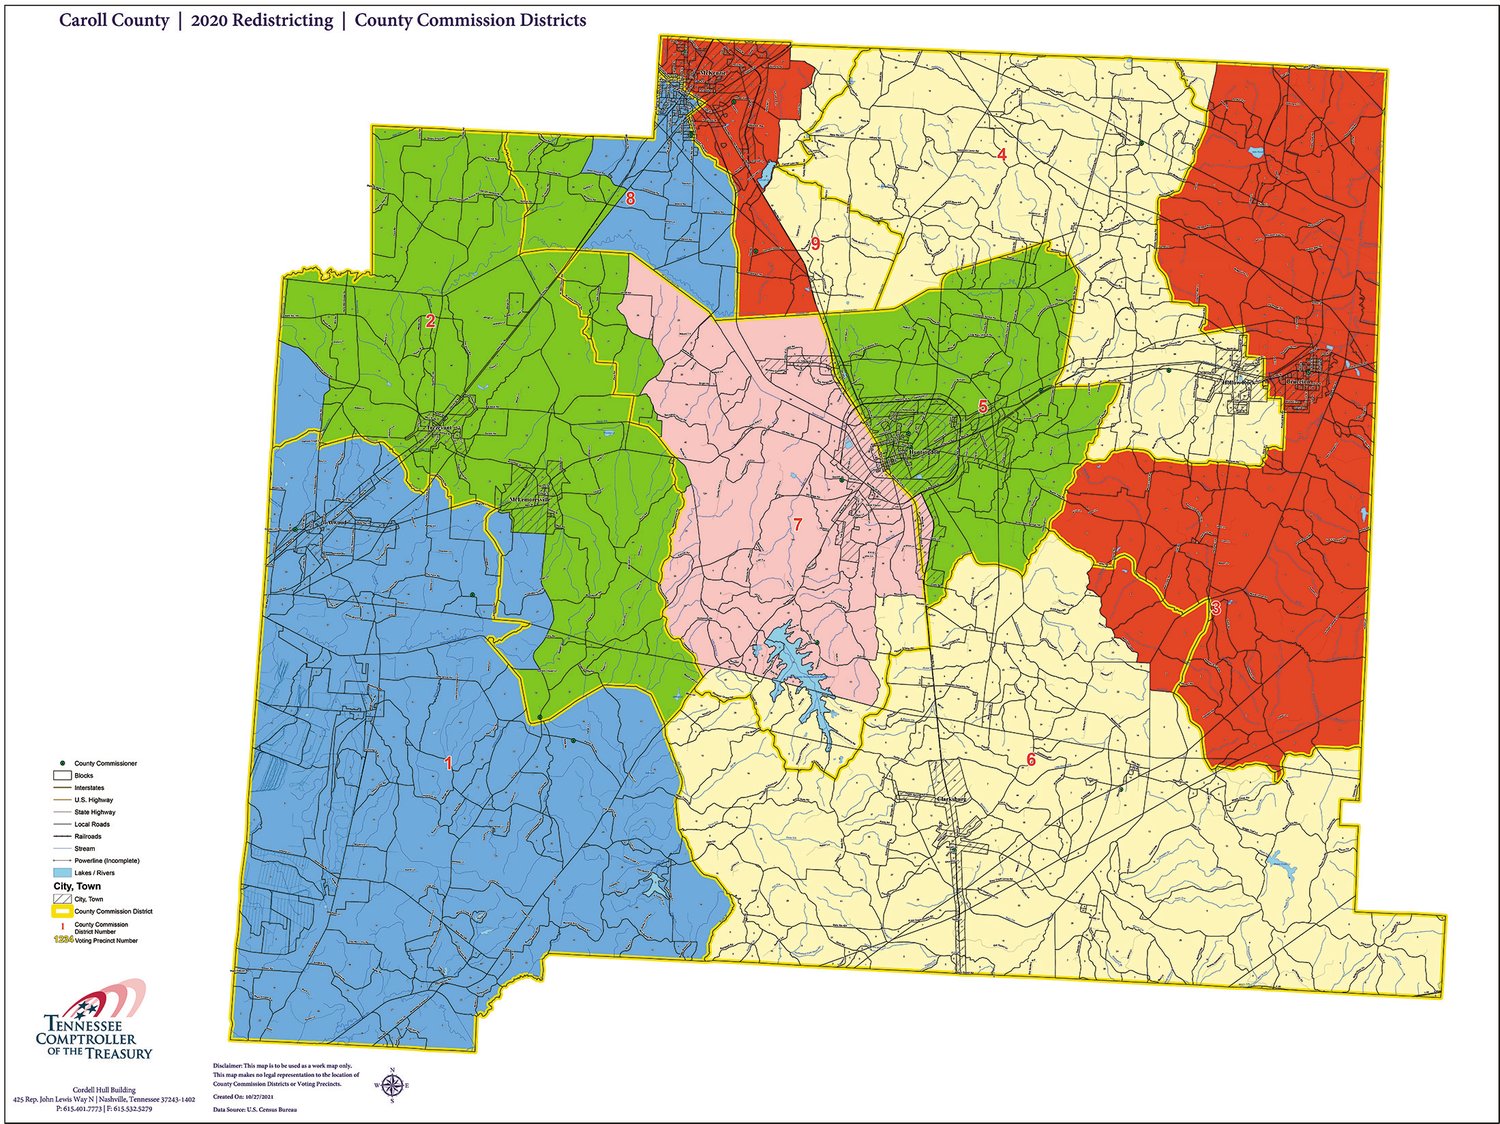 redistricting-is-on-november-carroll-county-agenda-the-mckenzie-banner